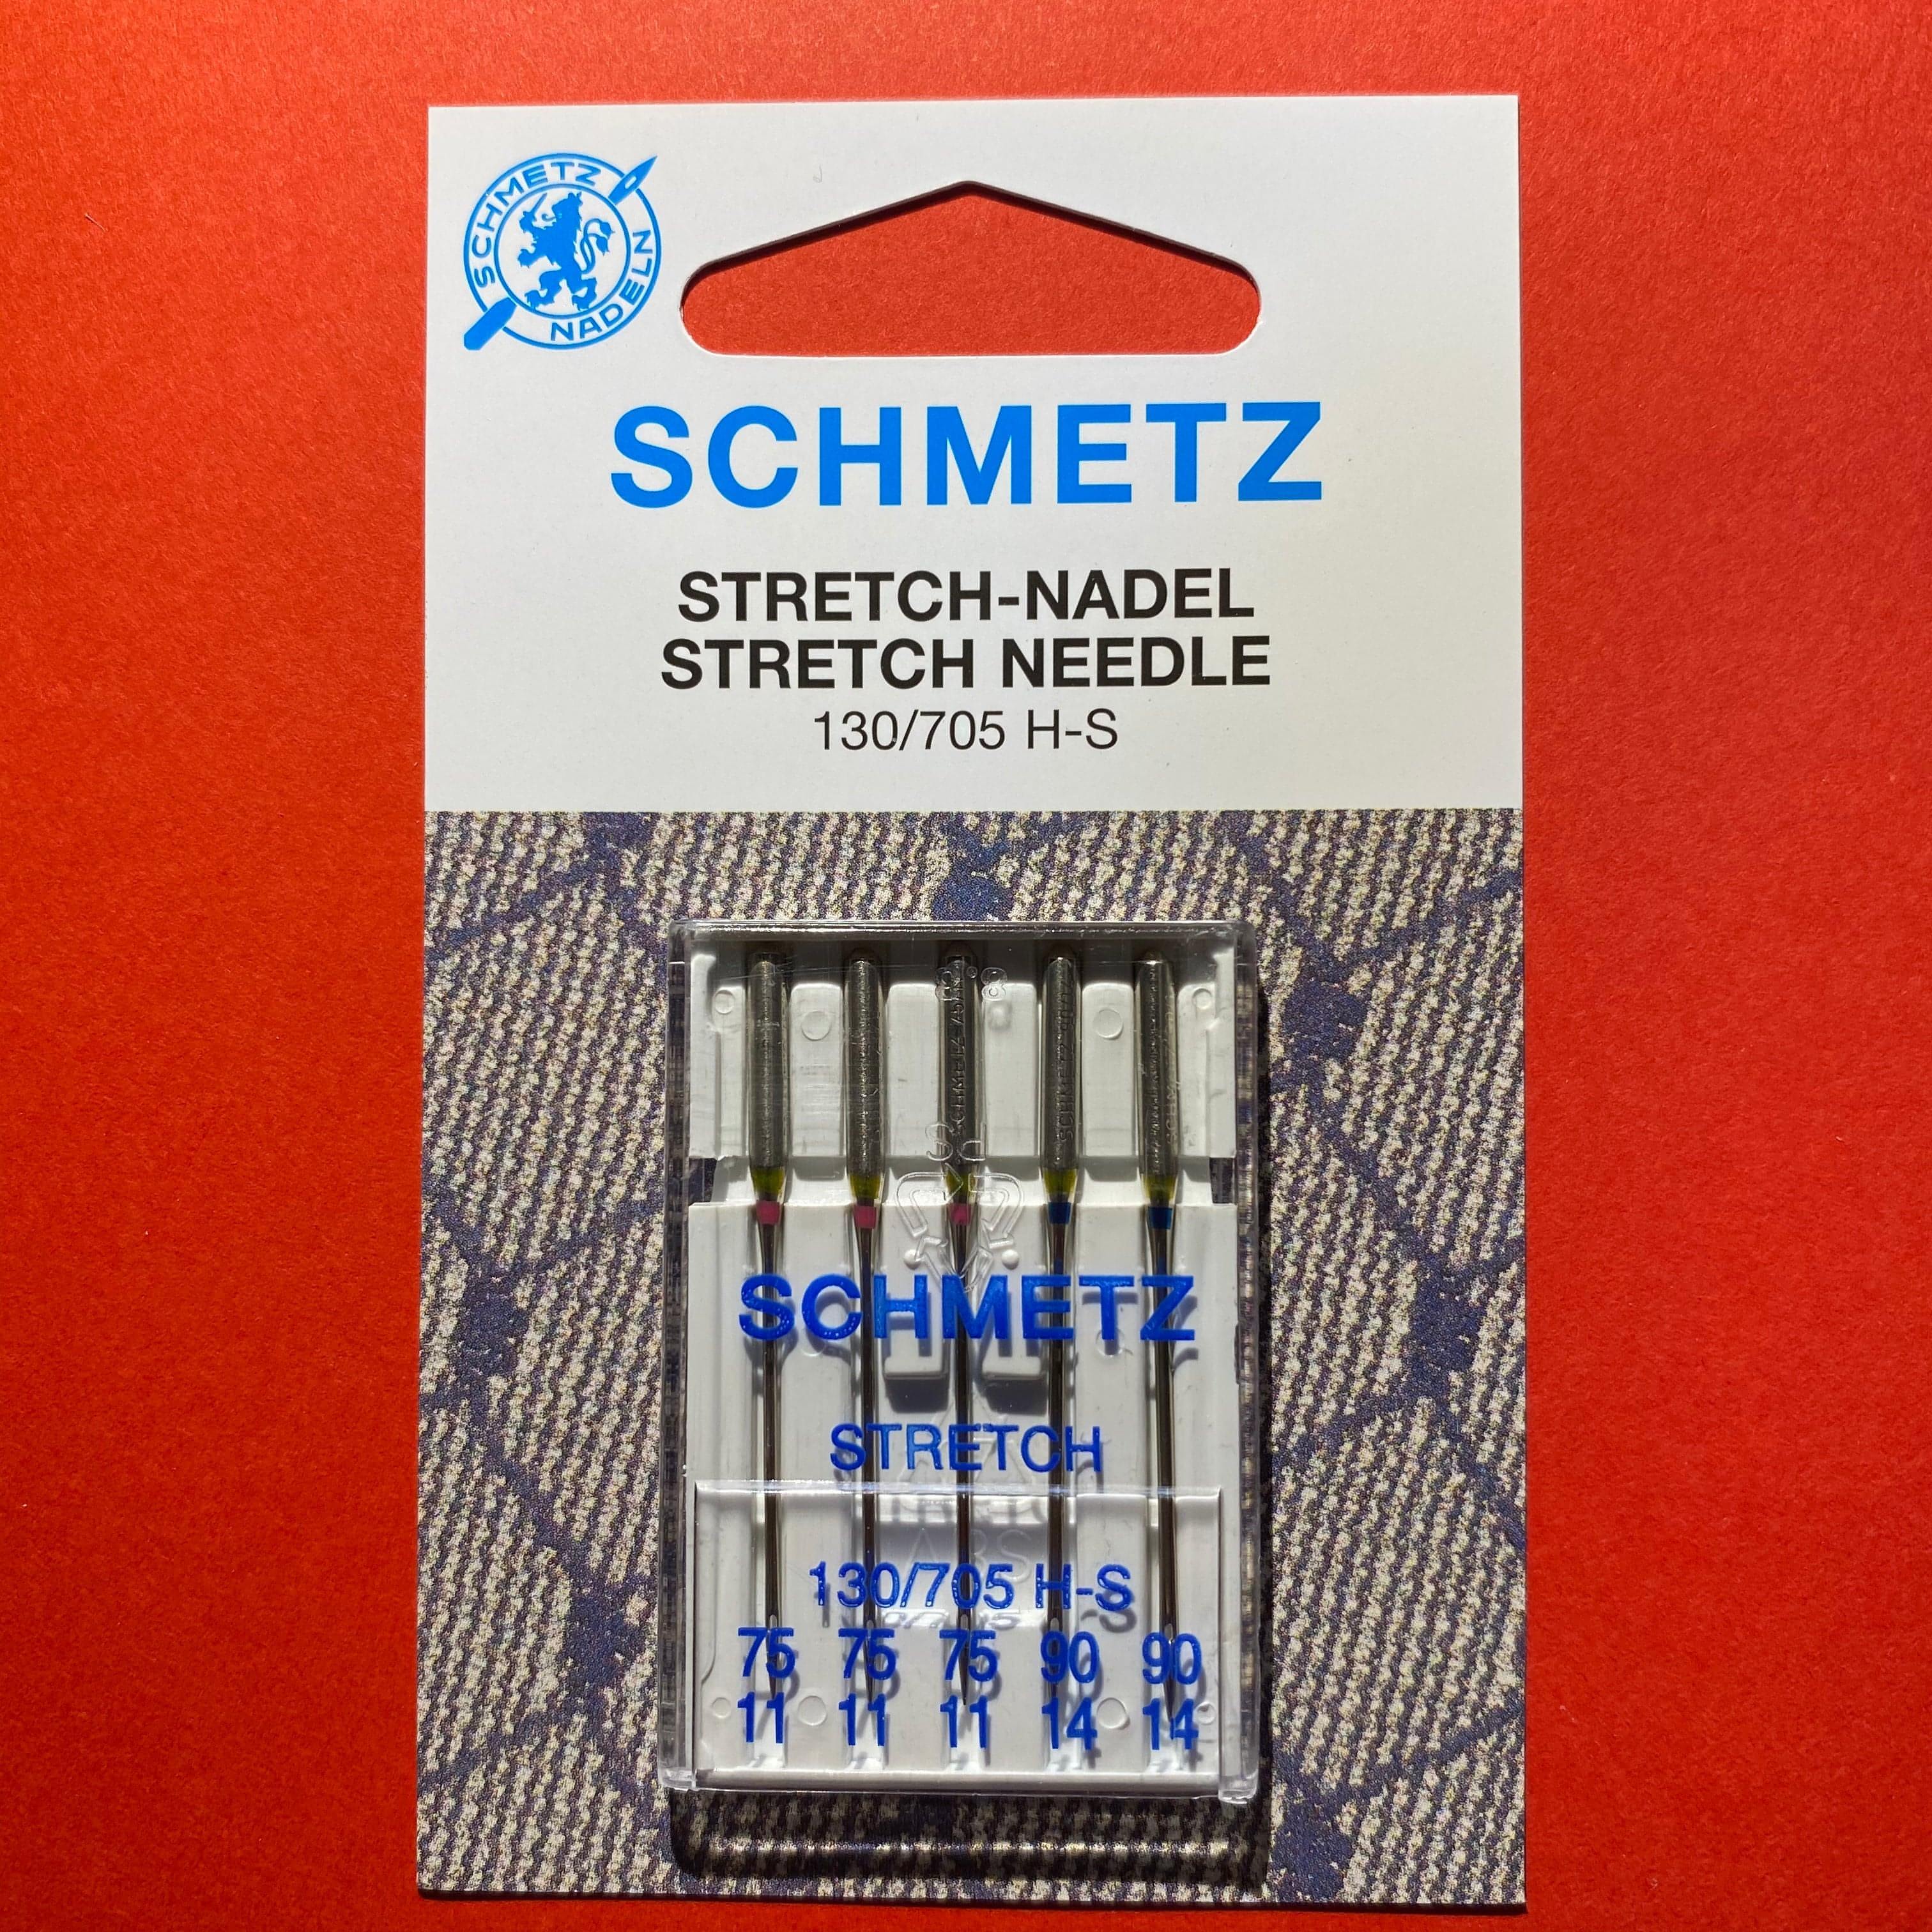 Schmetz Stretch Needles 130/705 H-S 75/11 and 90/14 - 5 pack